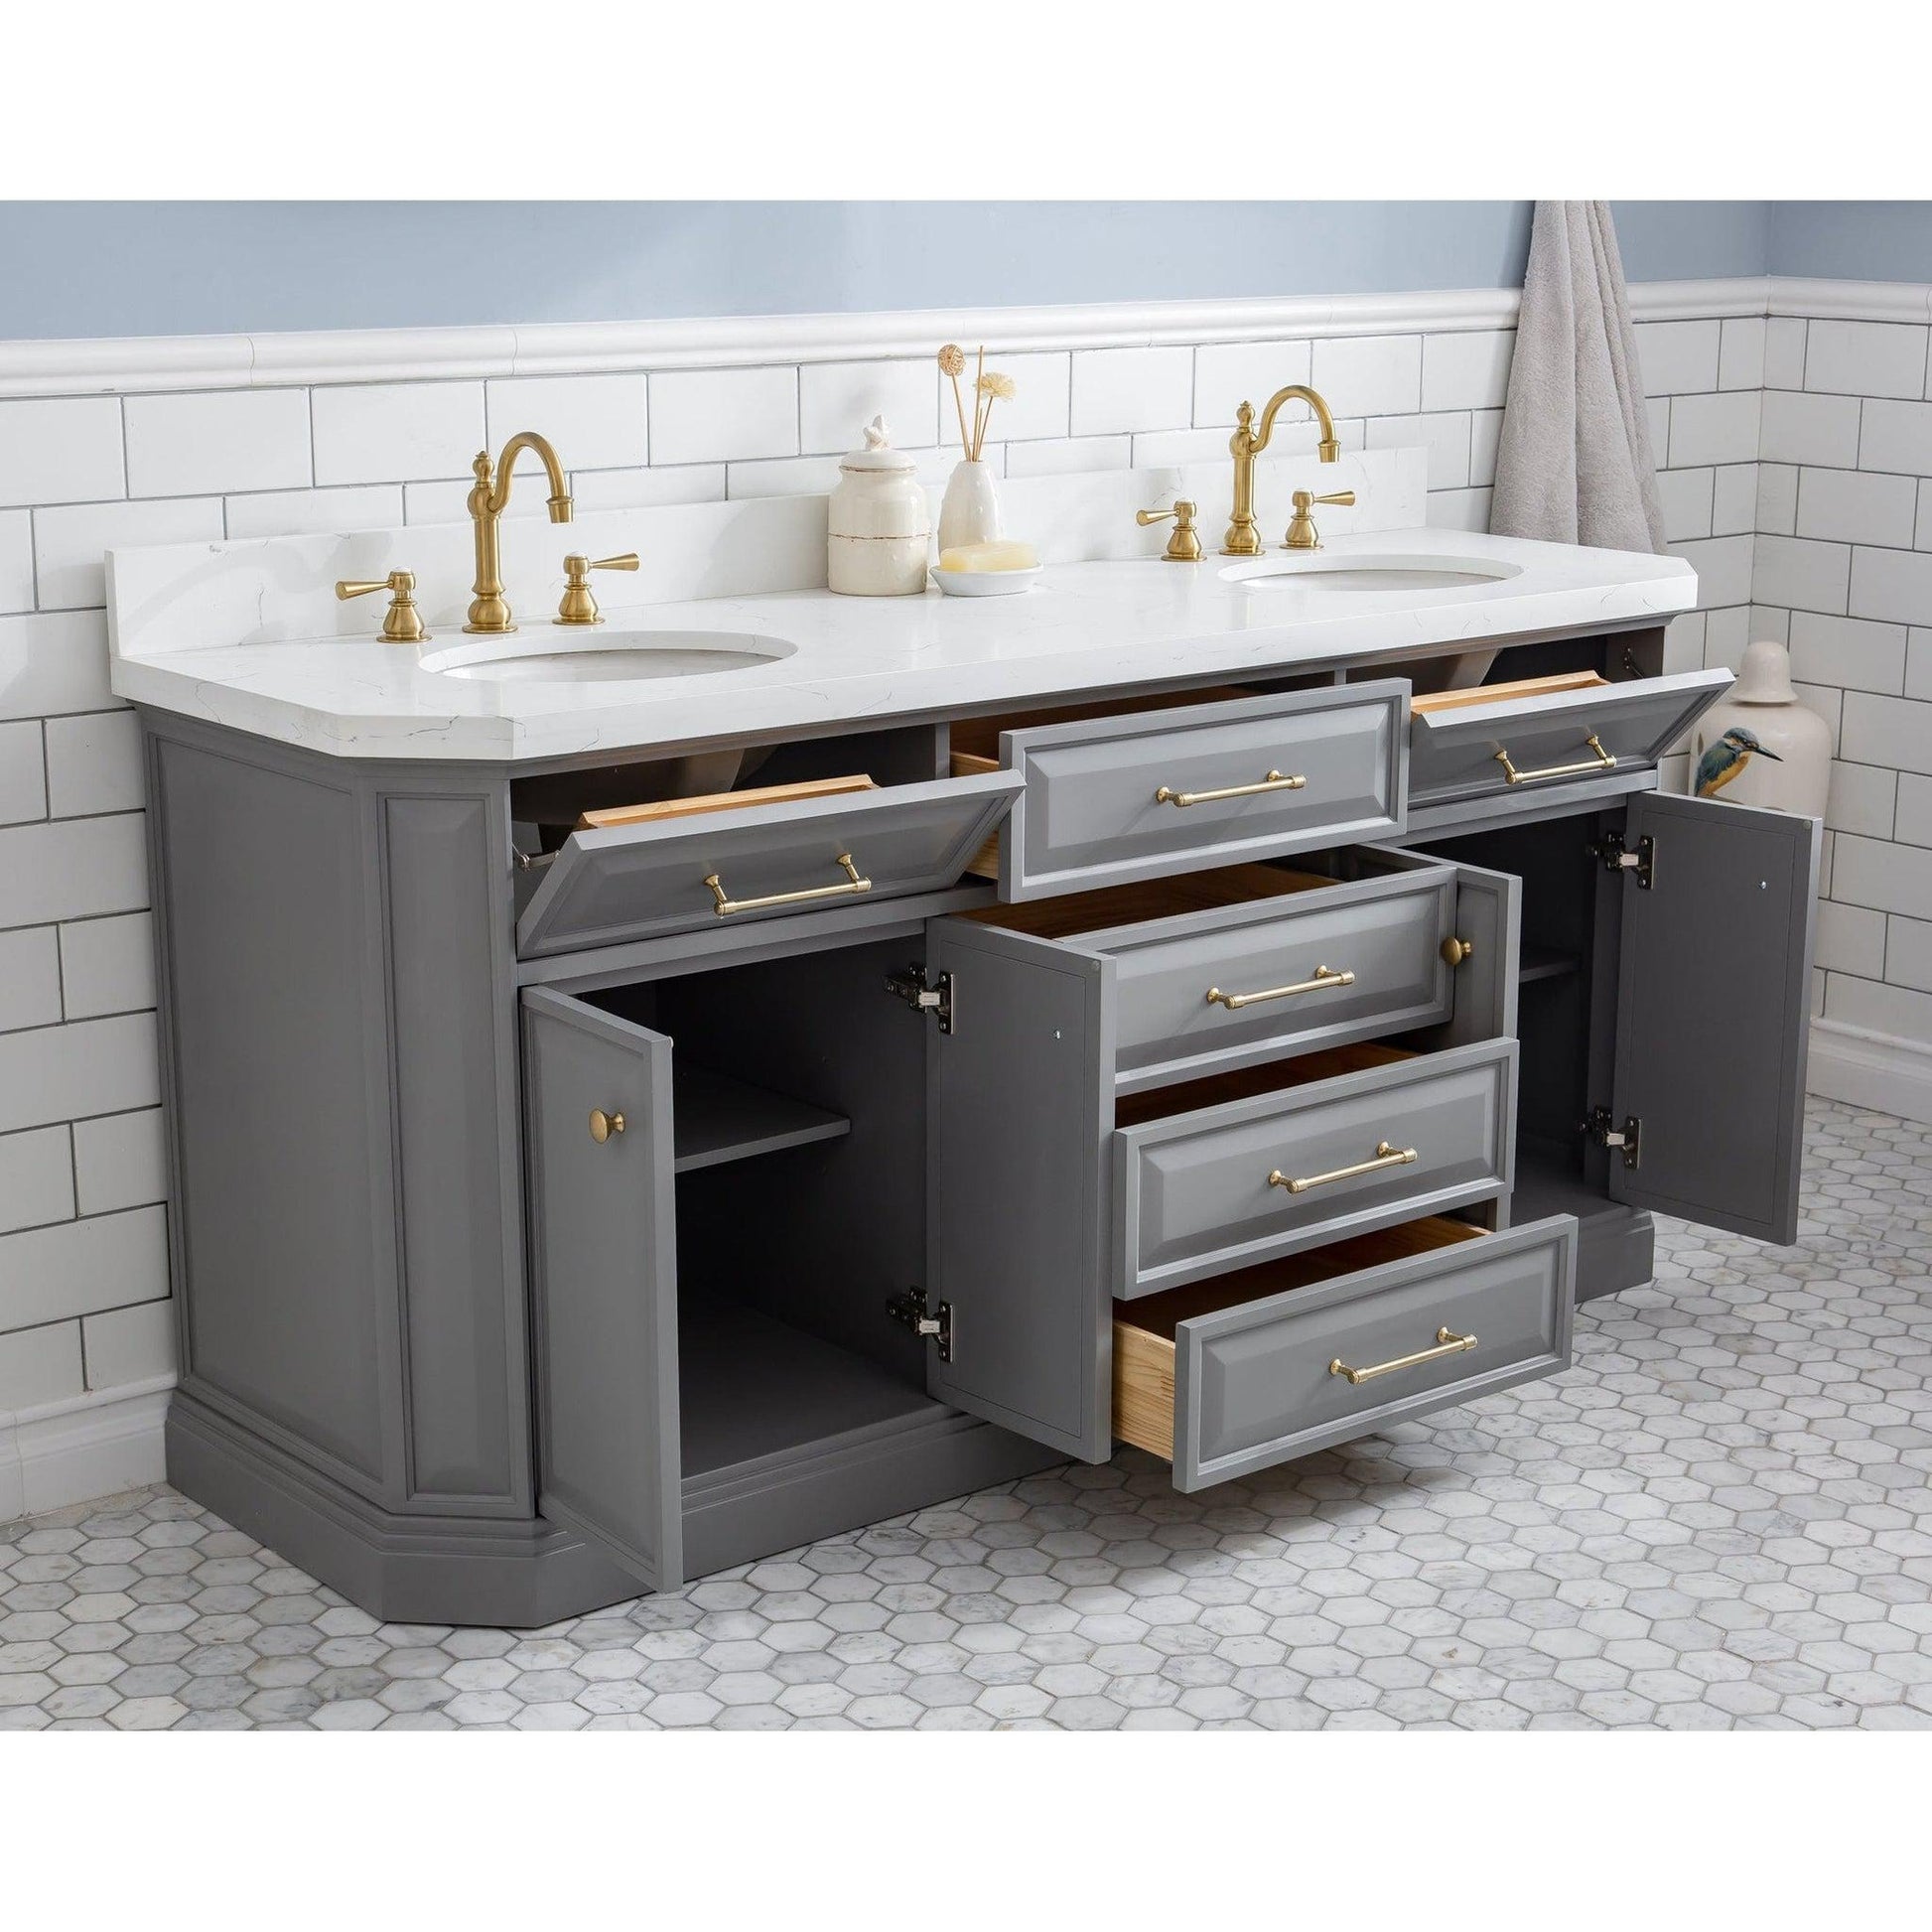 Water Creation Palace 72" Quartz Carrara Cashmere Grey Bathroom Vanity Set With Hardware in Satin Gold Finish And Only Mirrors in Chrome Finish